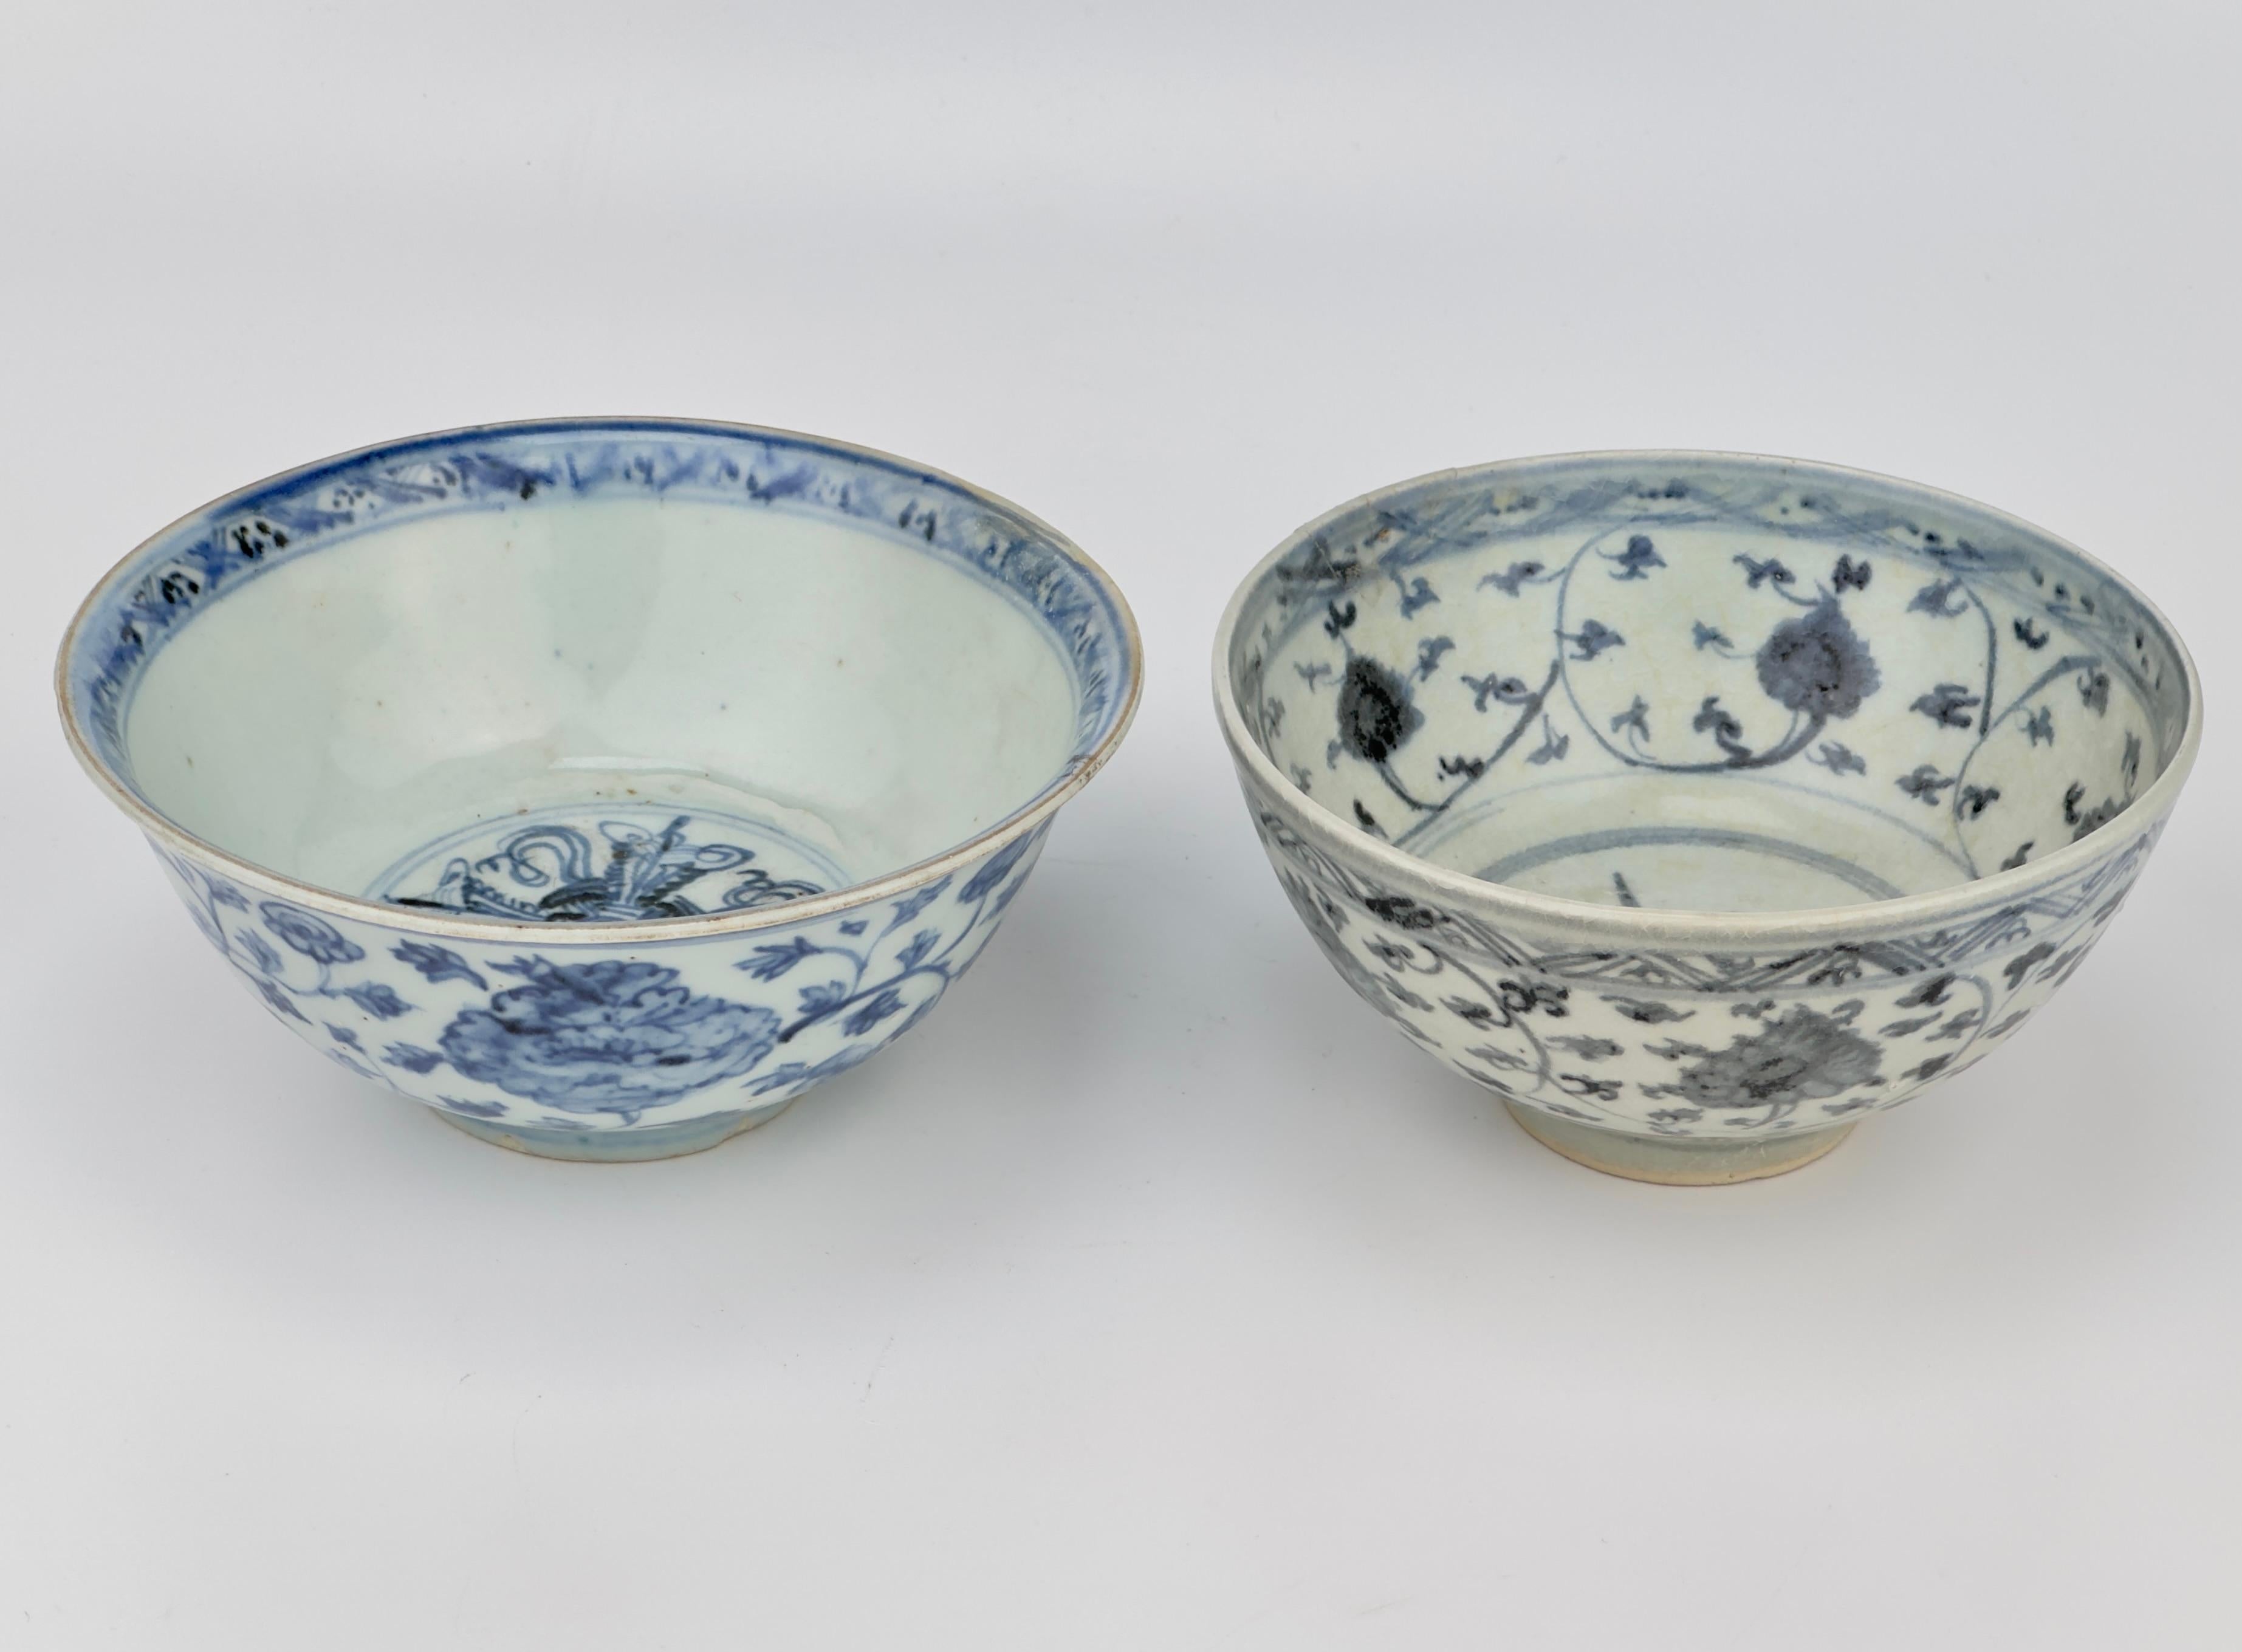 Chinese Two Bowls with knot shaped design on inside, Ming Era(15th century) For Sale